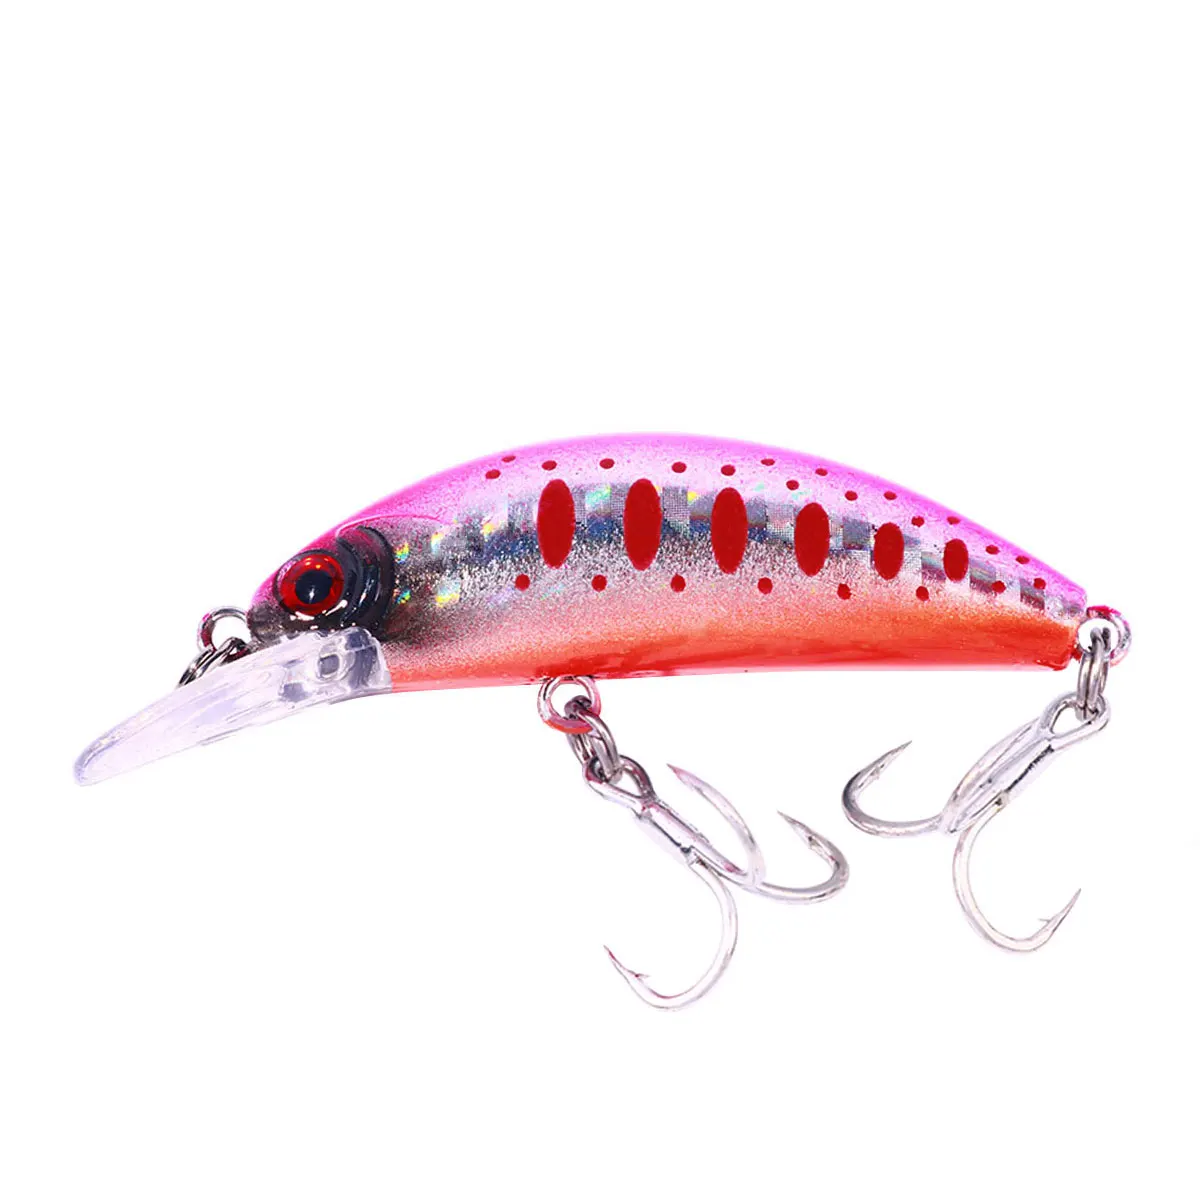 Minnow Fishing Lures, Sinking Minnow Lure